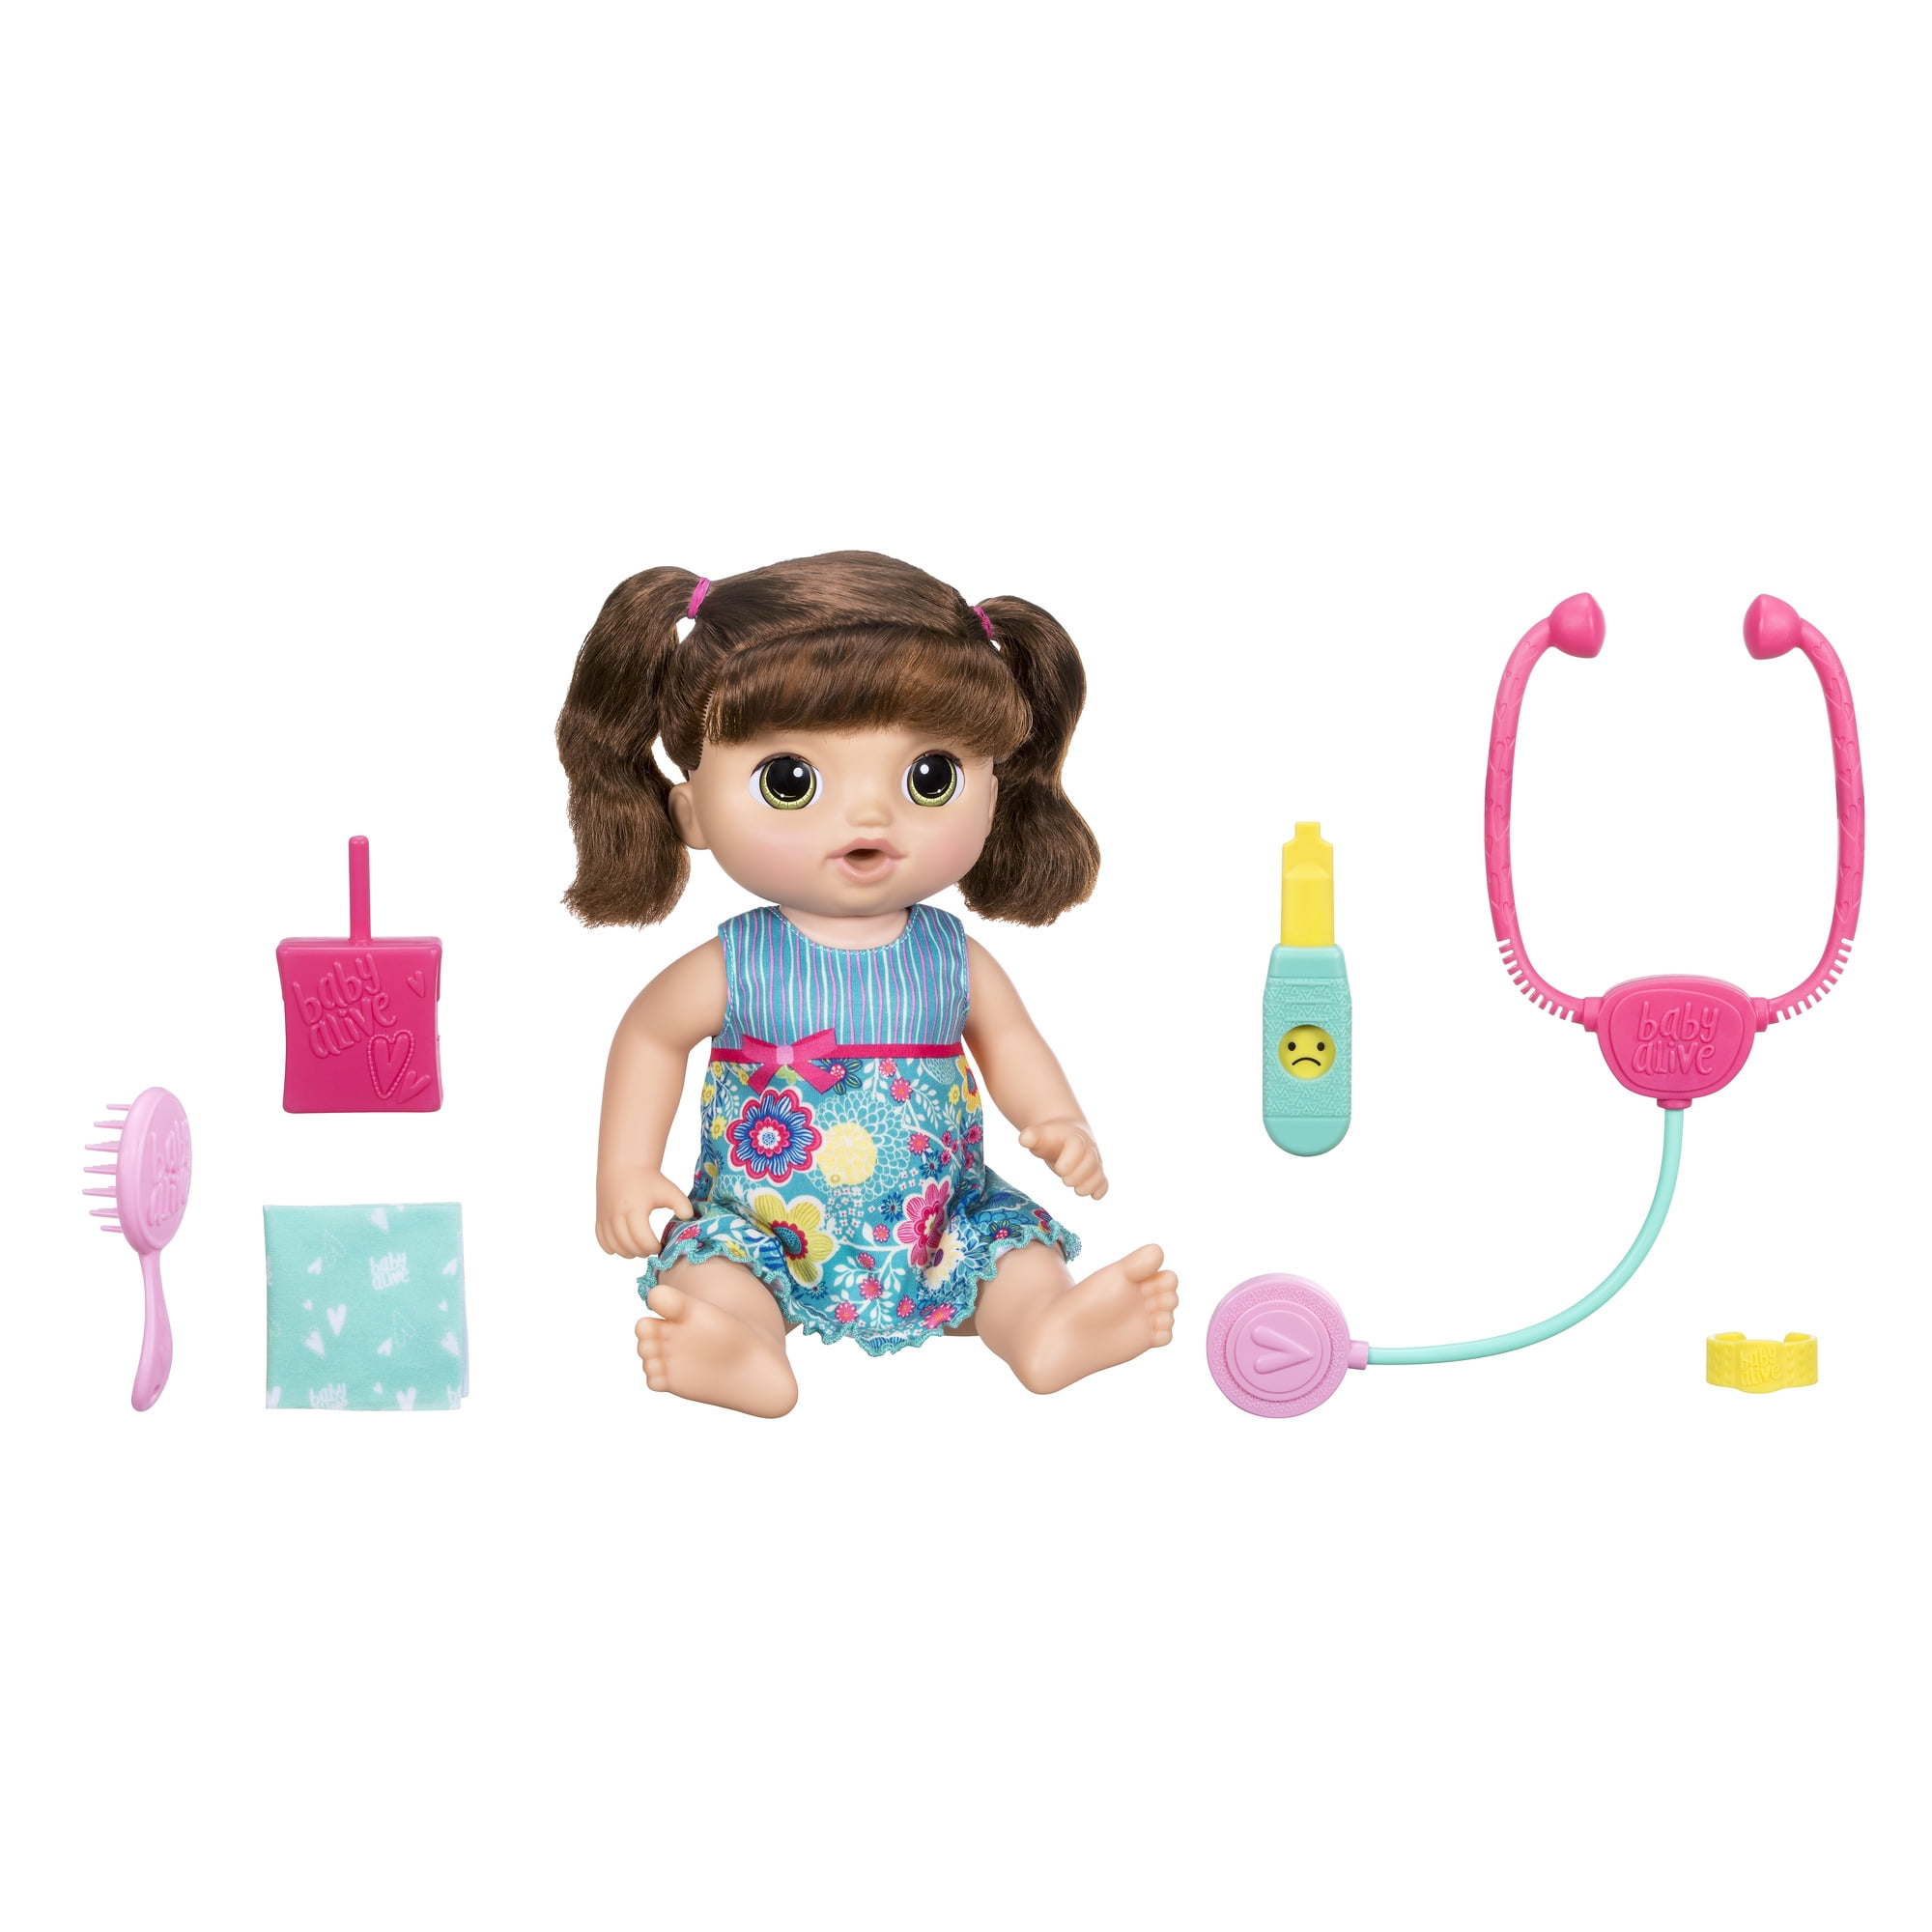 Baby Alive Sweet Tears Brown Hair Baby Doll, 35+ Phrases and Sounds, Drinks, Shows Emotion, Reacts to Sounds, Ages 3+ (Walmart Exclusive)